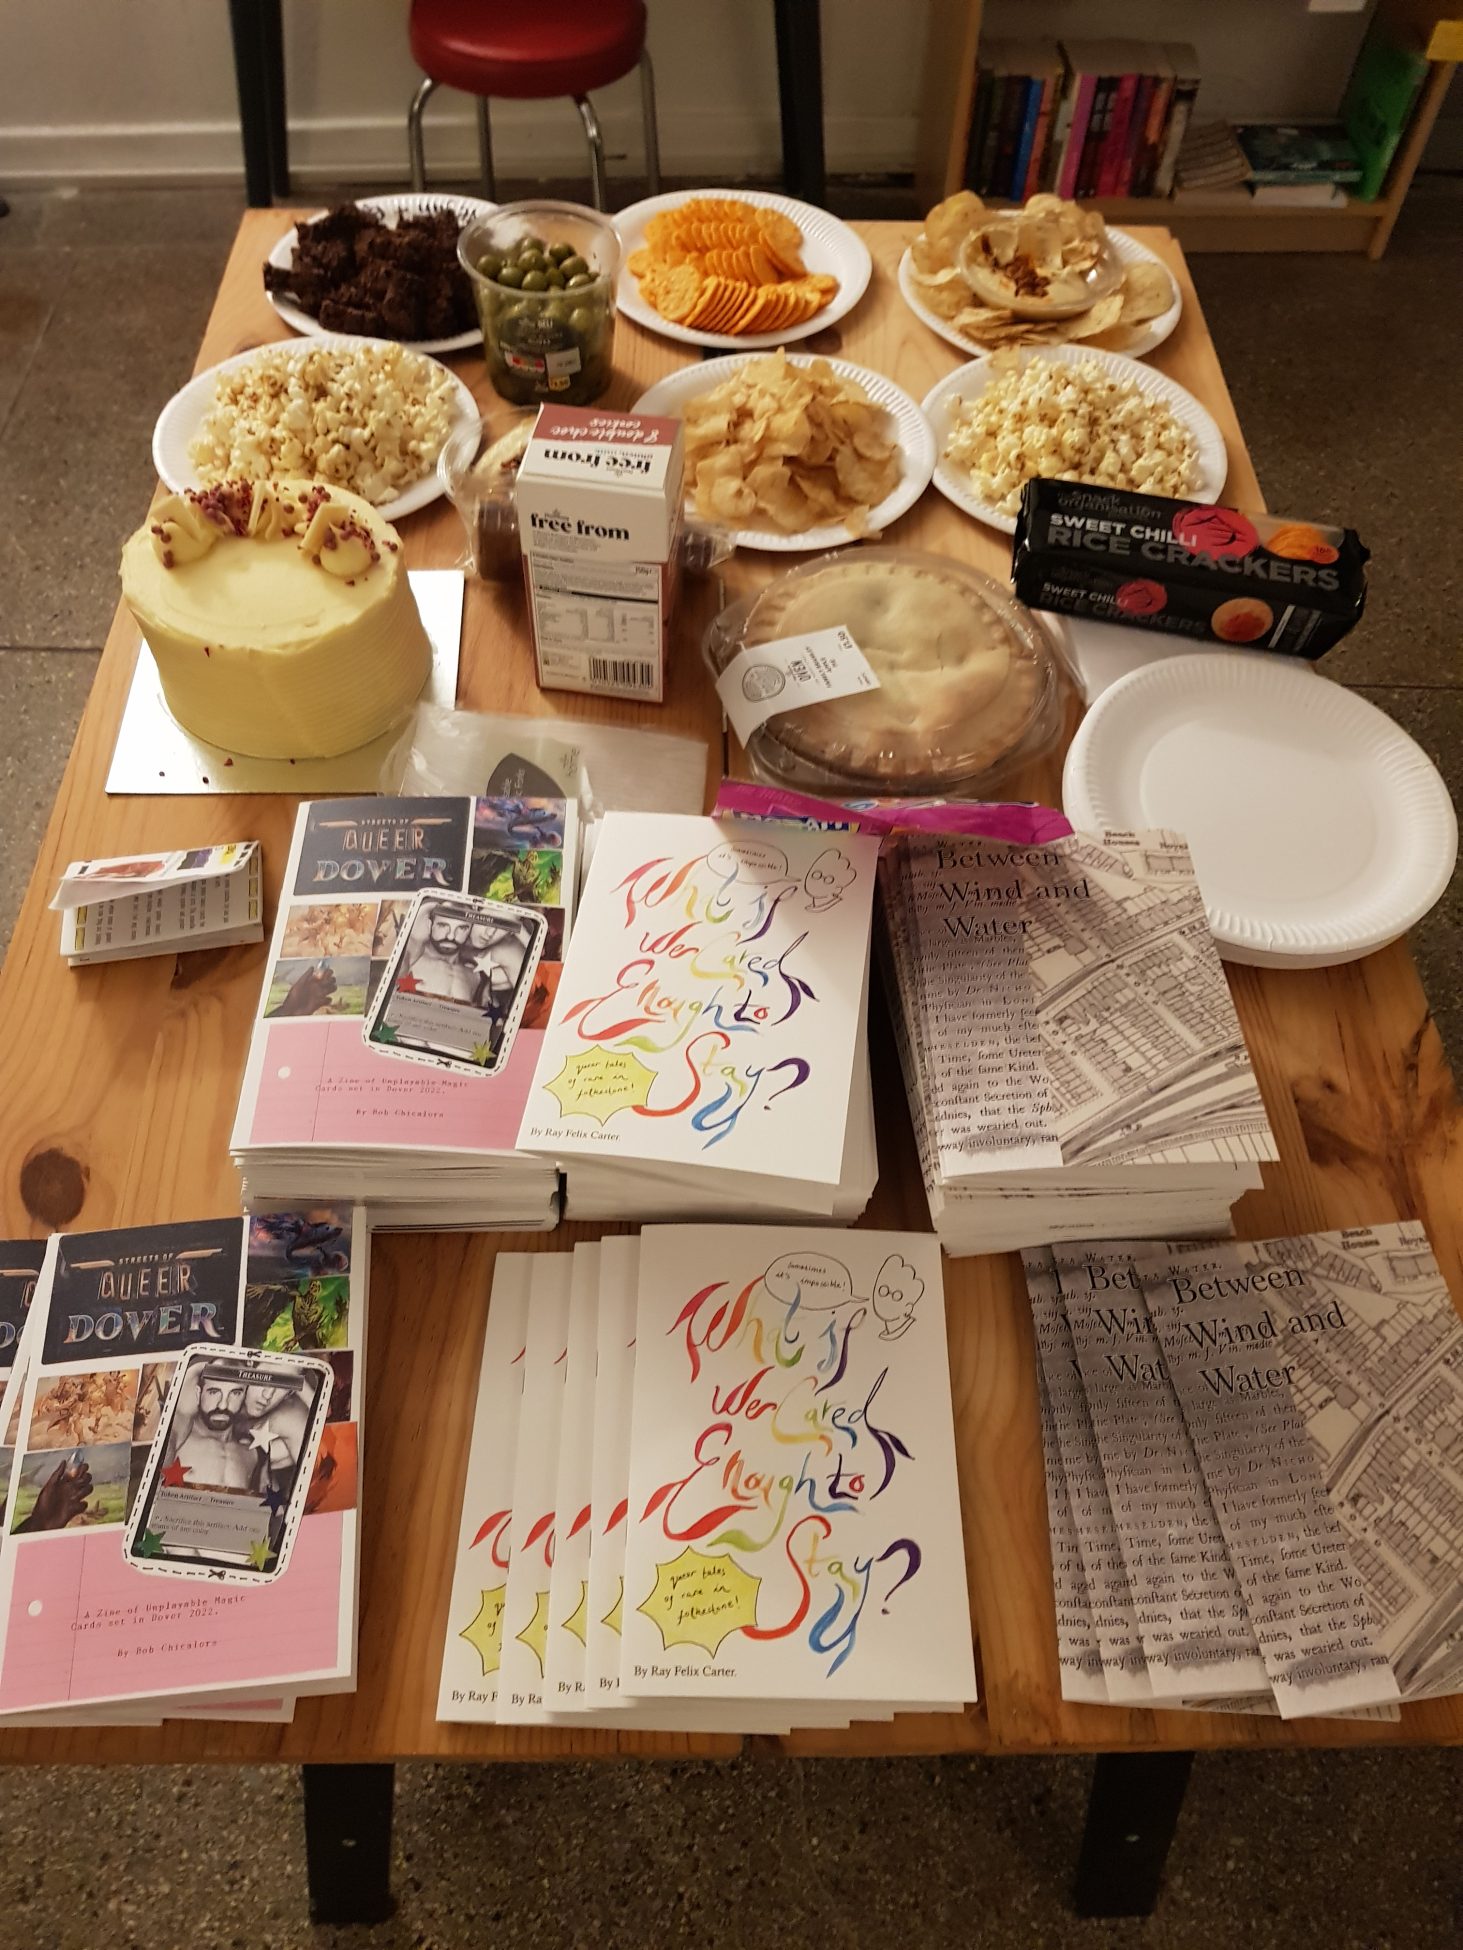 Photo of a table in Folkestone Bookshop. One half has stacks of the three zines, printed as A5 booklets, and the other half has a variety of snacks including pop corn, olives, cakes, crisps and crackers.